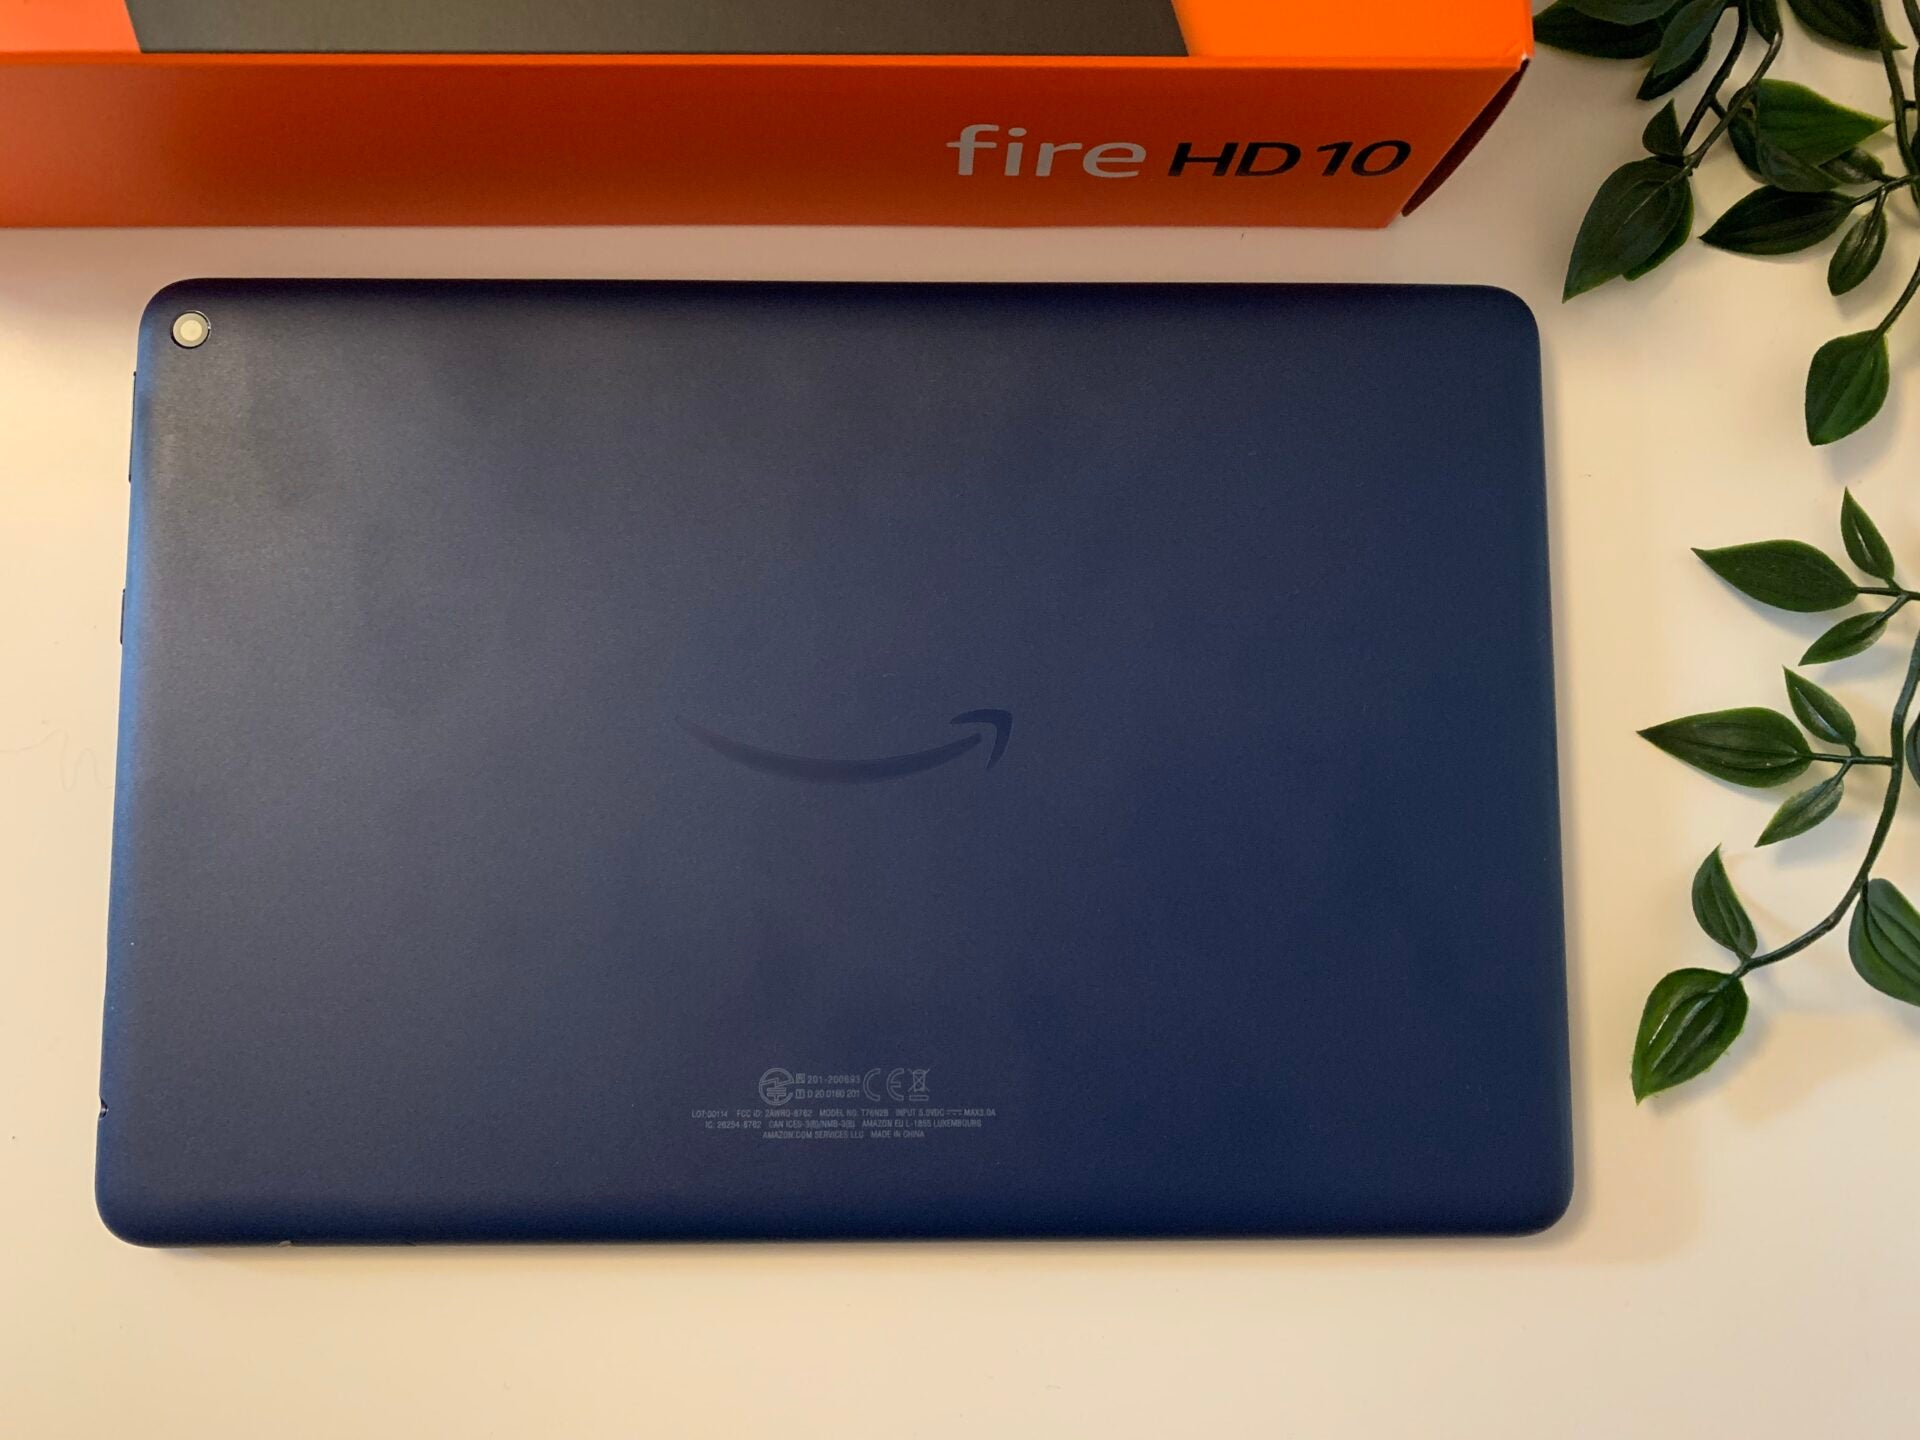 Amazon Fire HD 10 Review | Trusted Reviews